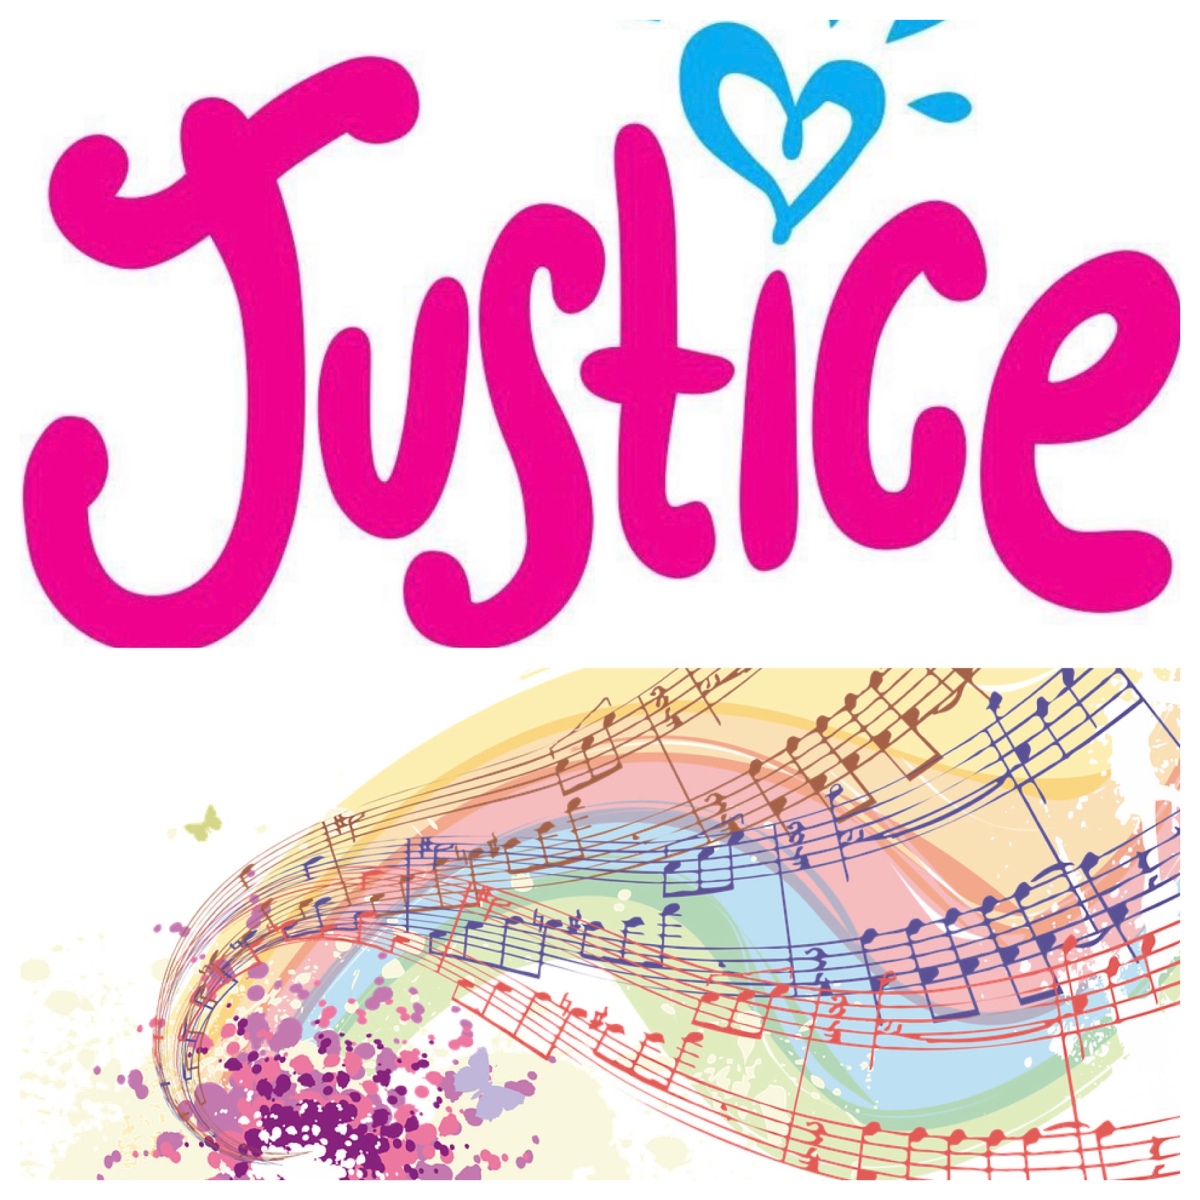 Justice and joy: a sequence of Psalms for Christmas